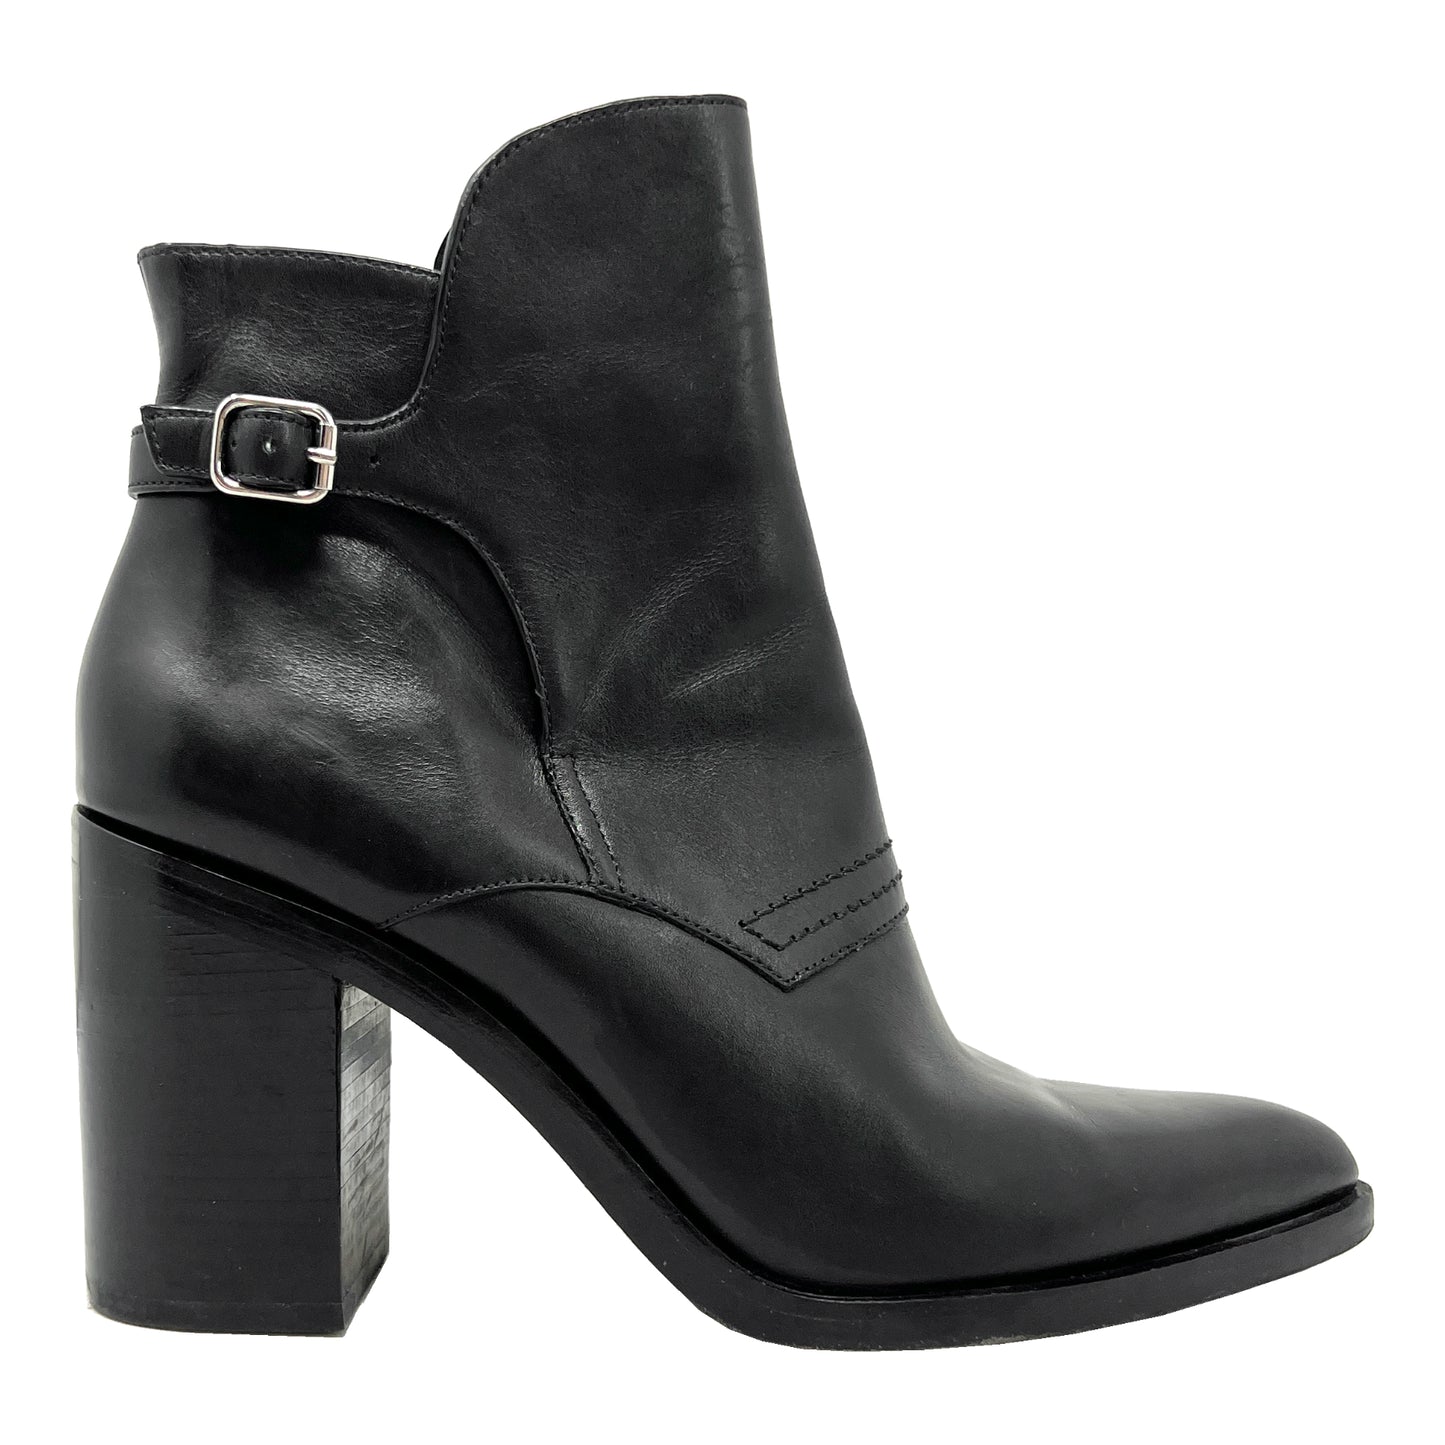 Alexander Wang Boots Black Leather Pointed Toe Western Block Heel Ankle Boots Size EU 38.5